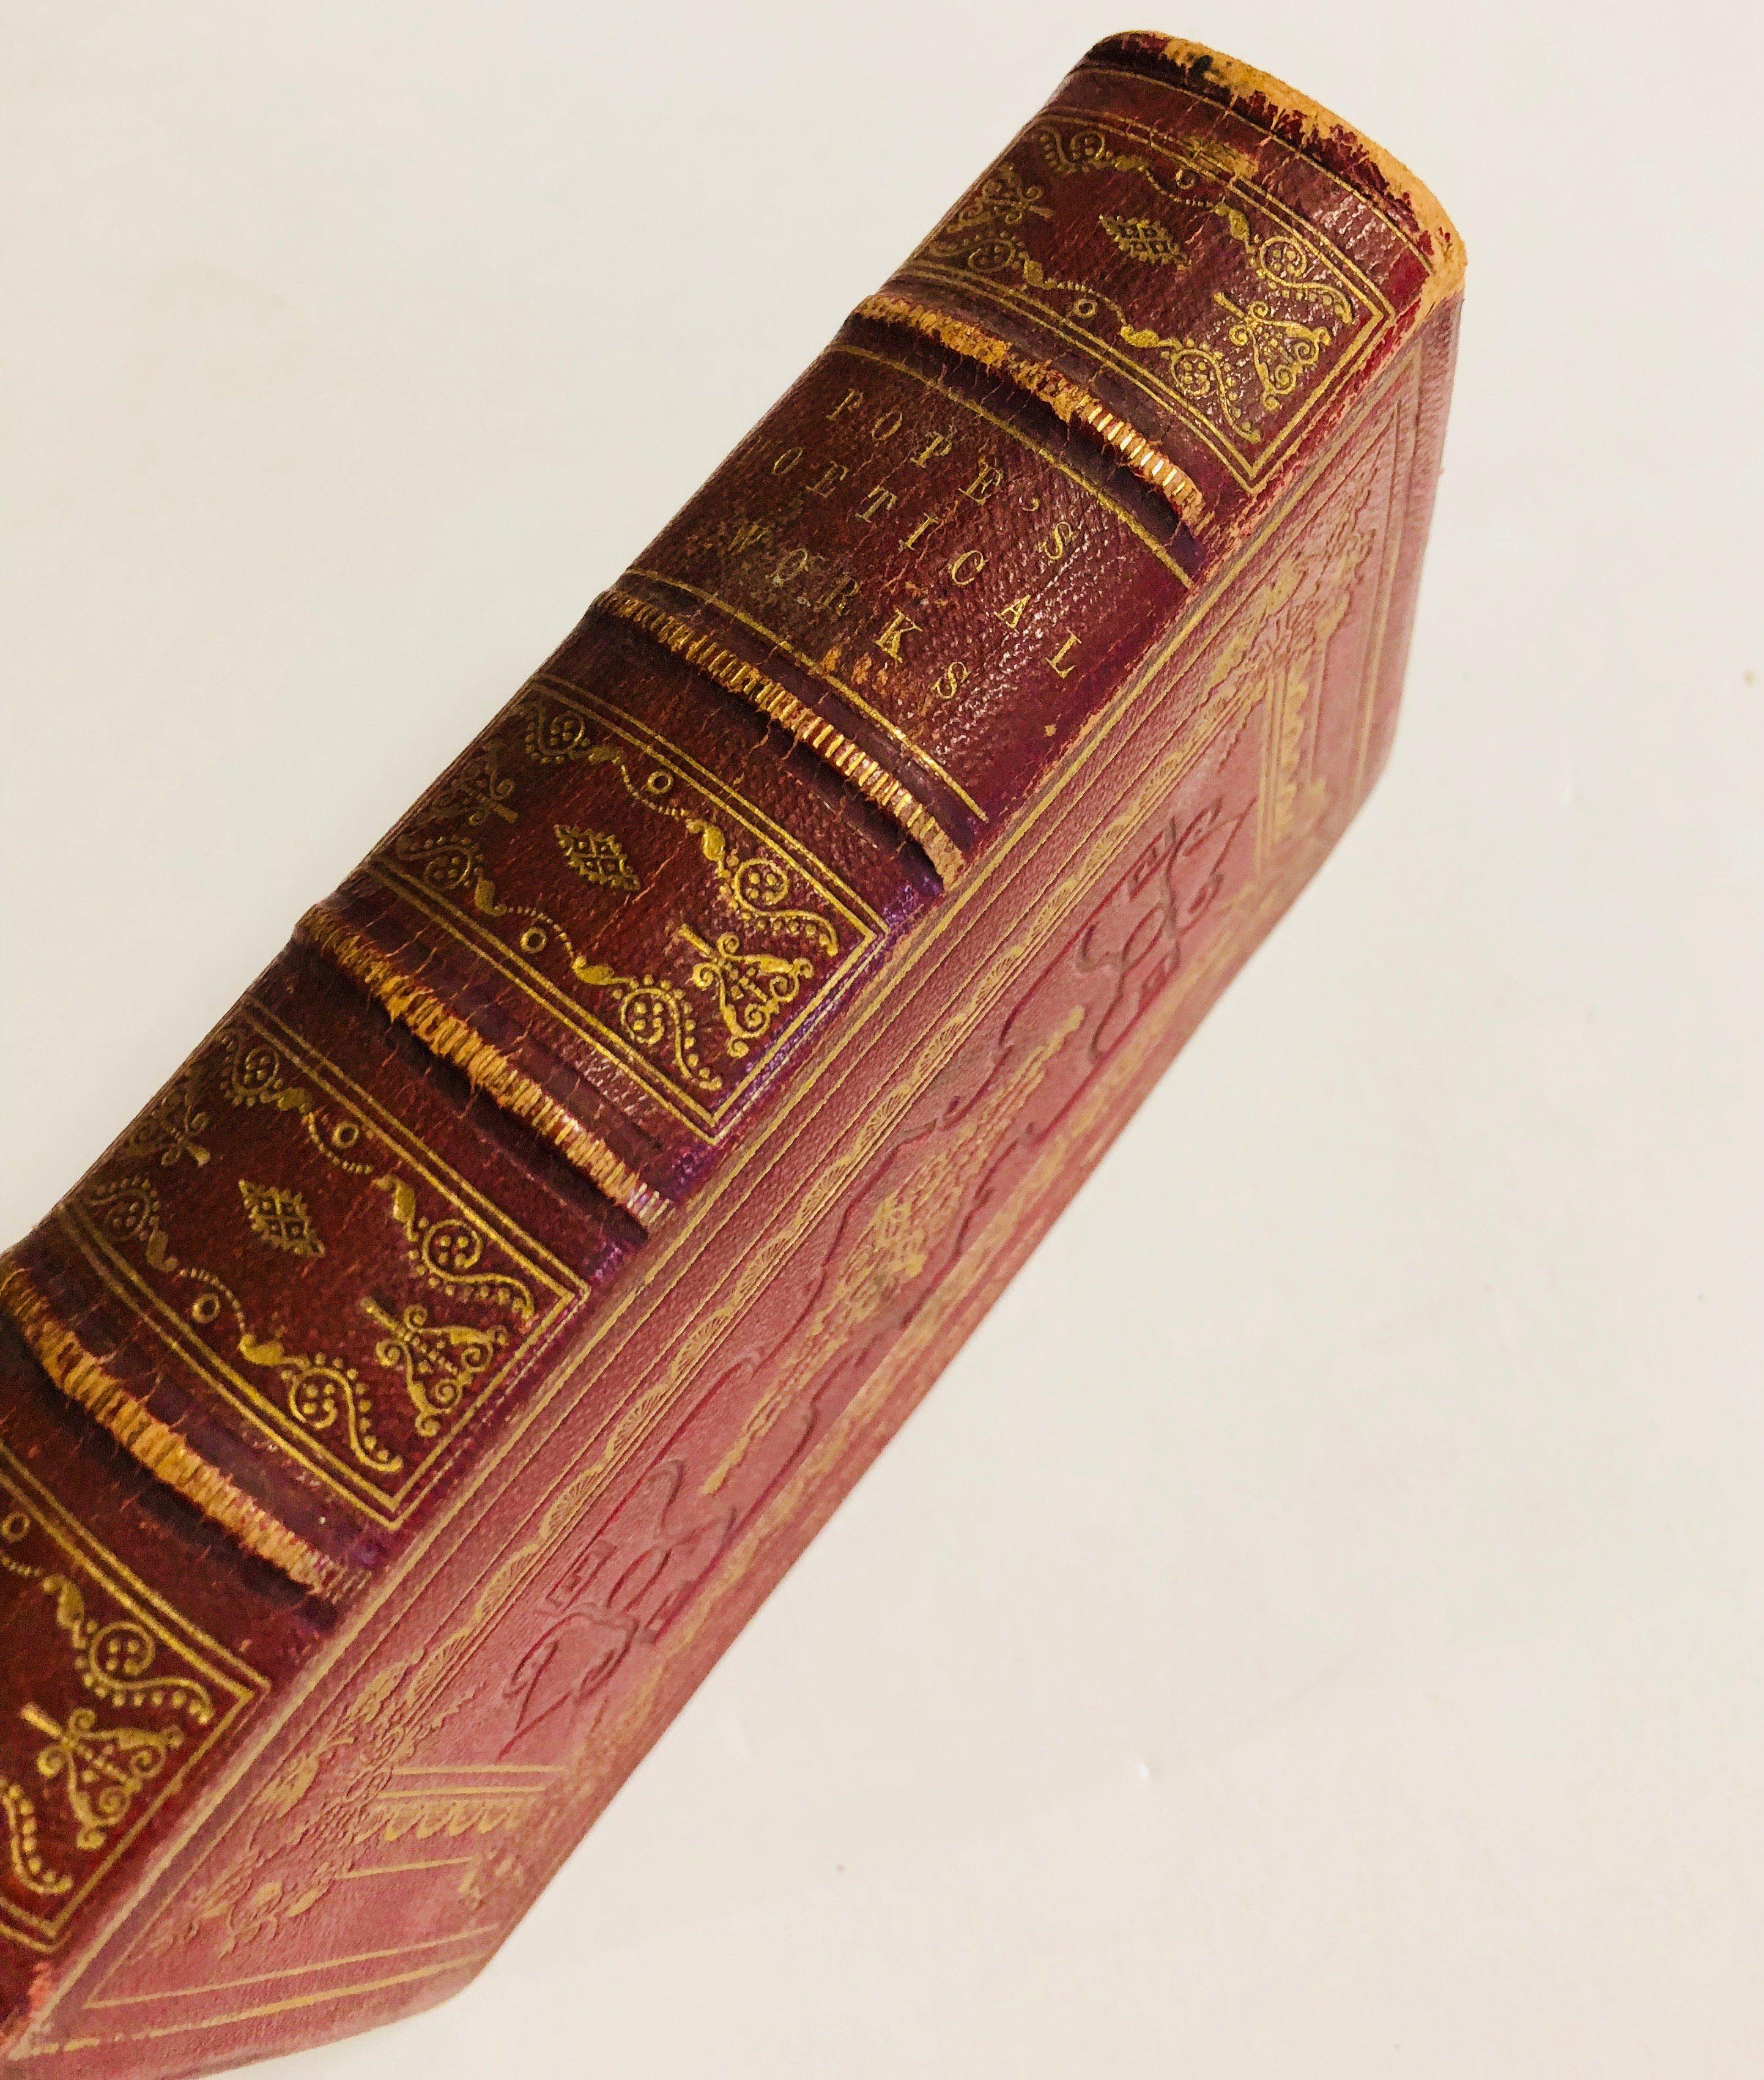 The Works of Alexander Pope (c.1855) Poetical Works for Sir Walter Scott (1871) Decorative Bindings